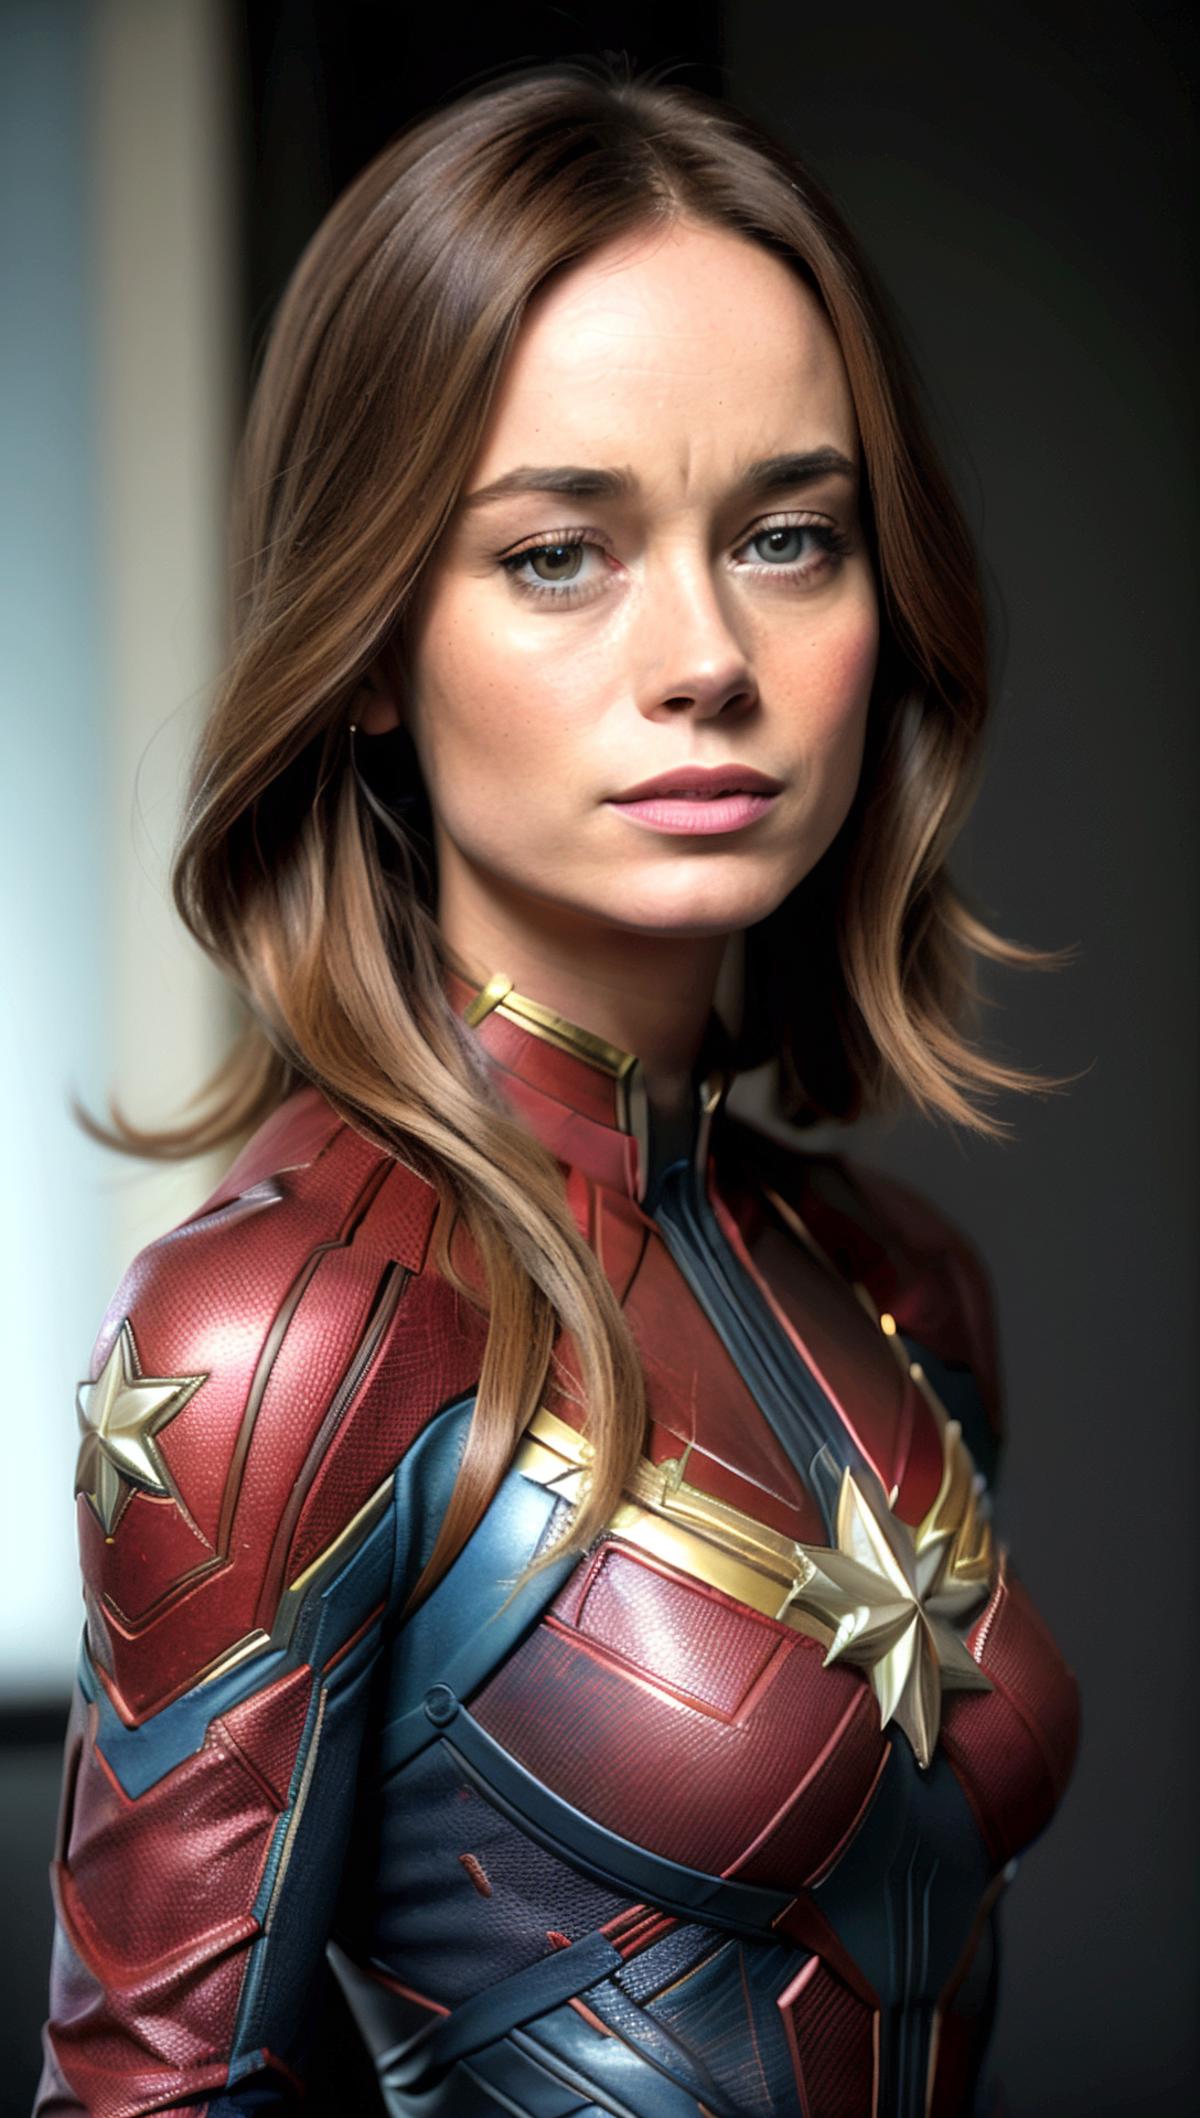 Brie Larson image by wlmsg